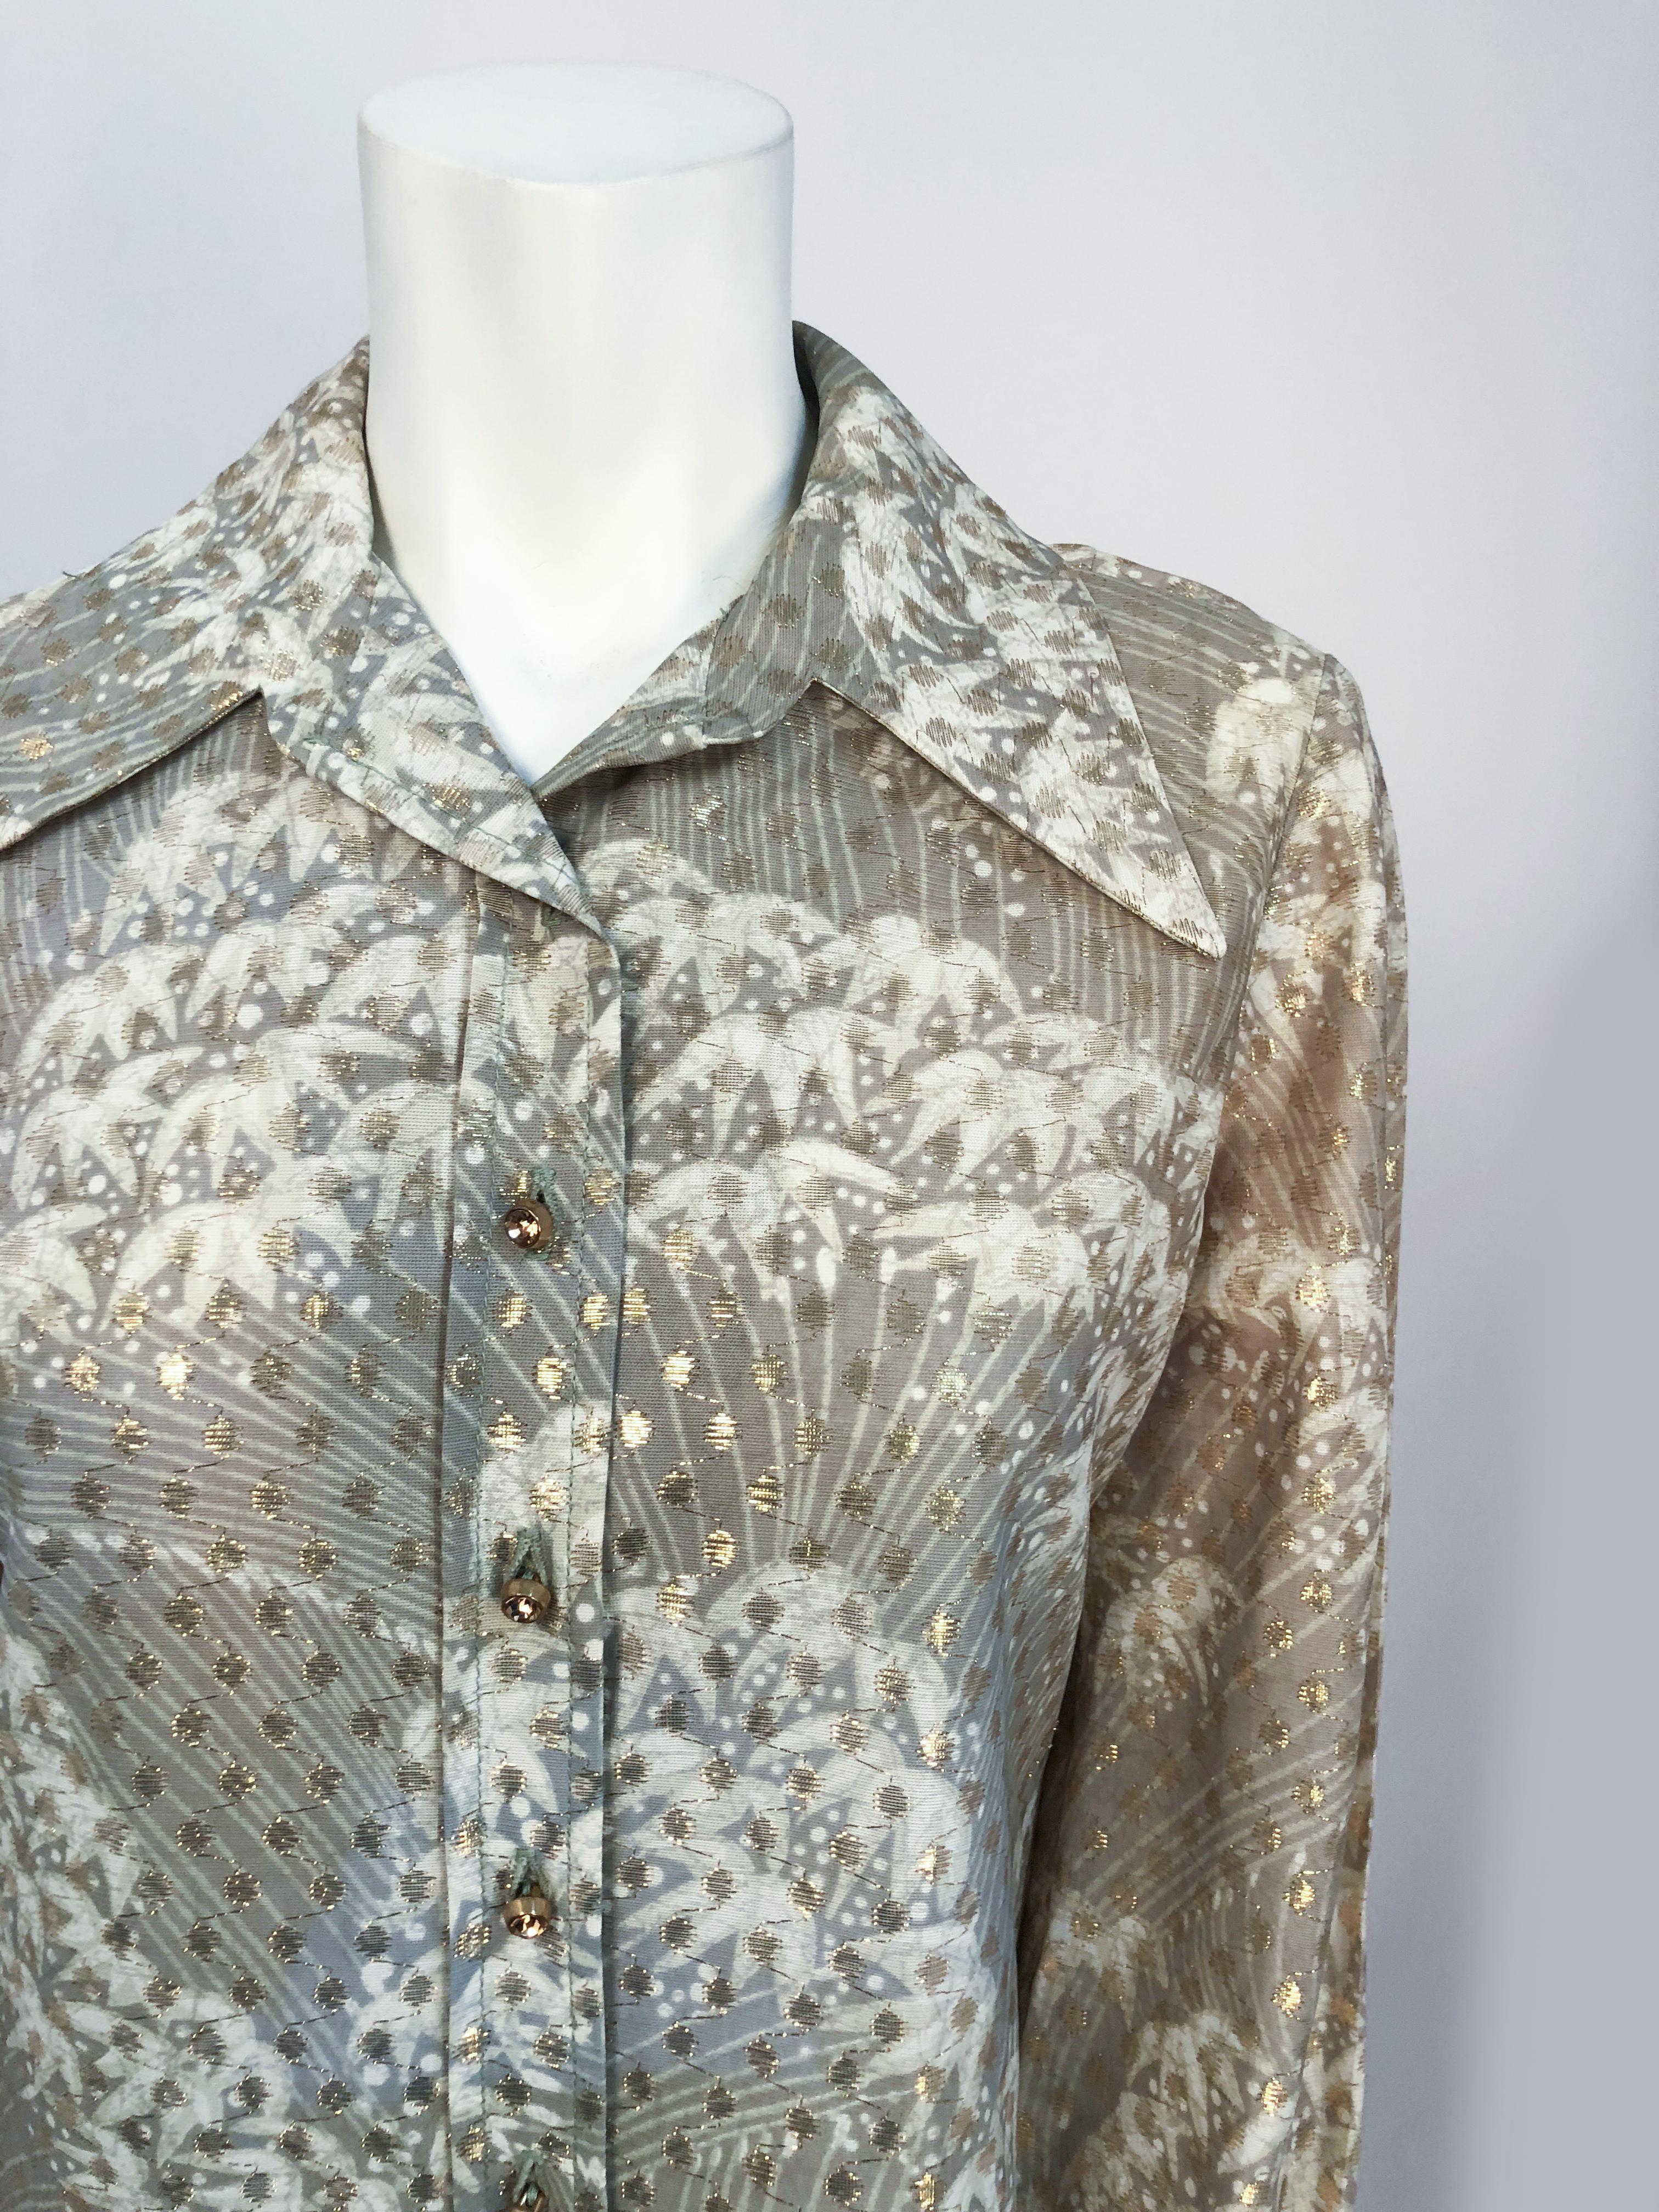 1970s I. Magnin Printed Shirt. Sage green and cream printed shirt with butterfly collar, cuffed selves, side vents, and amber rhinestone buttons. The fabric has a gold-toned lurex polka-dot pattern.